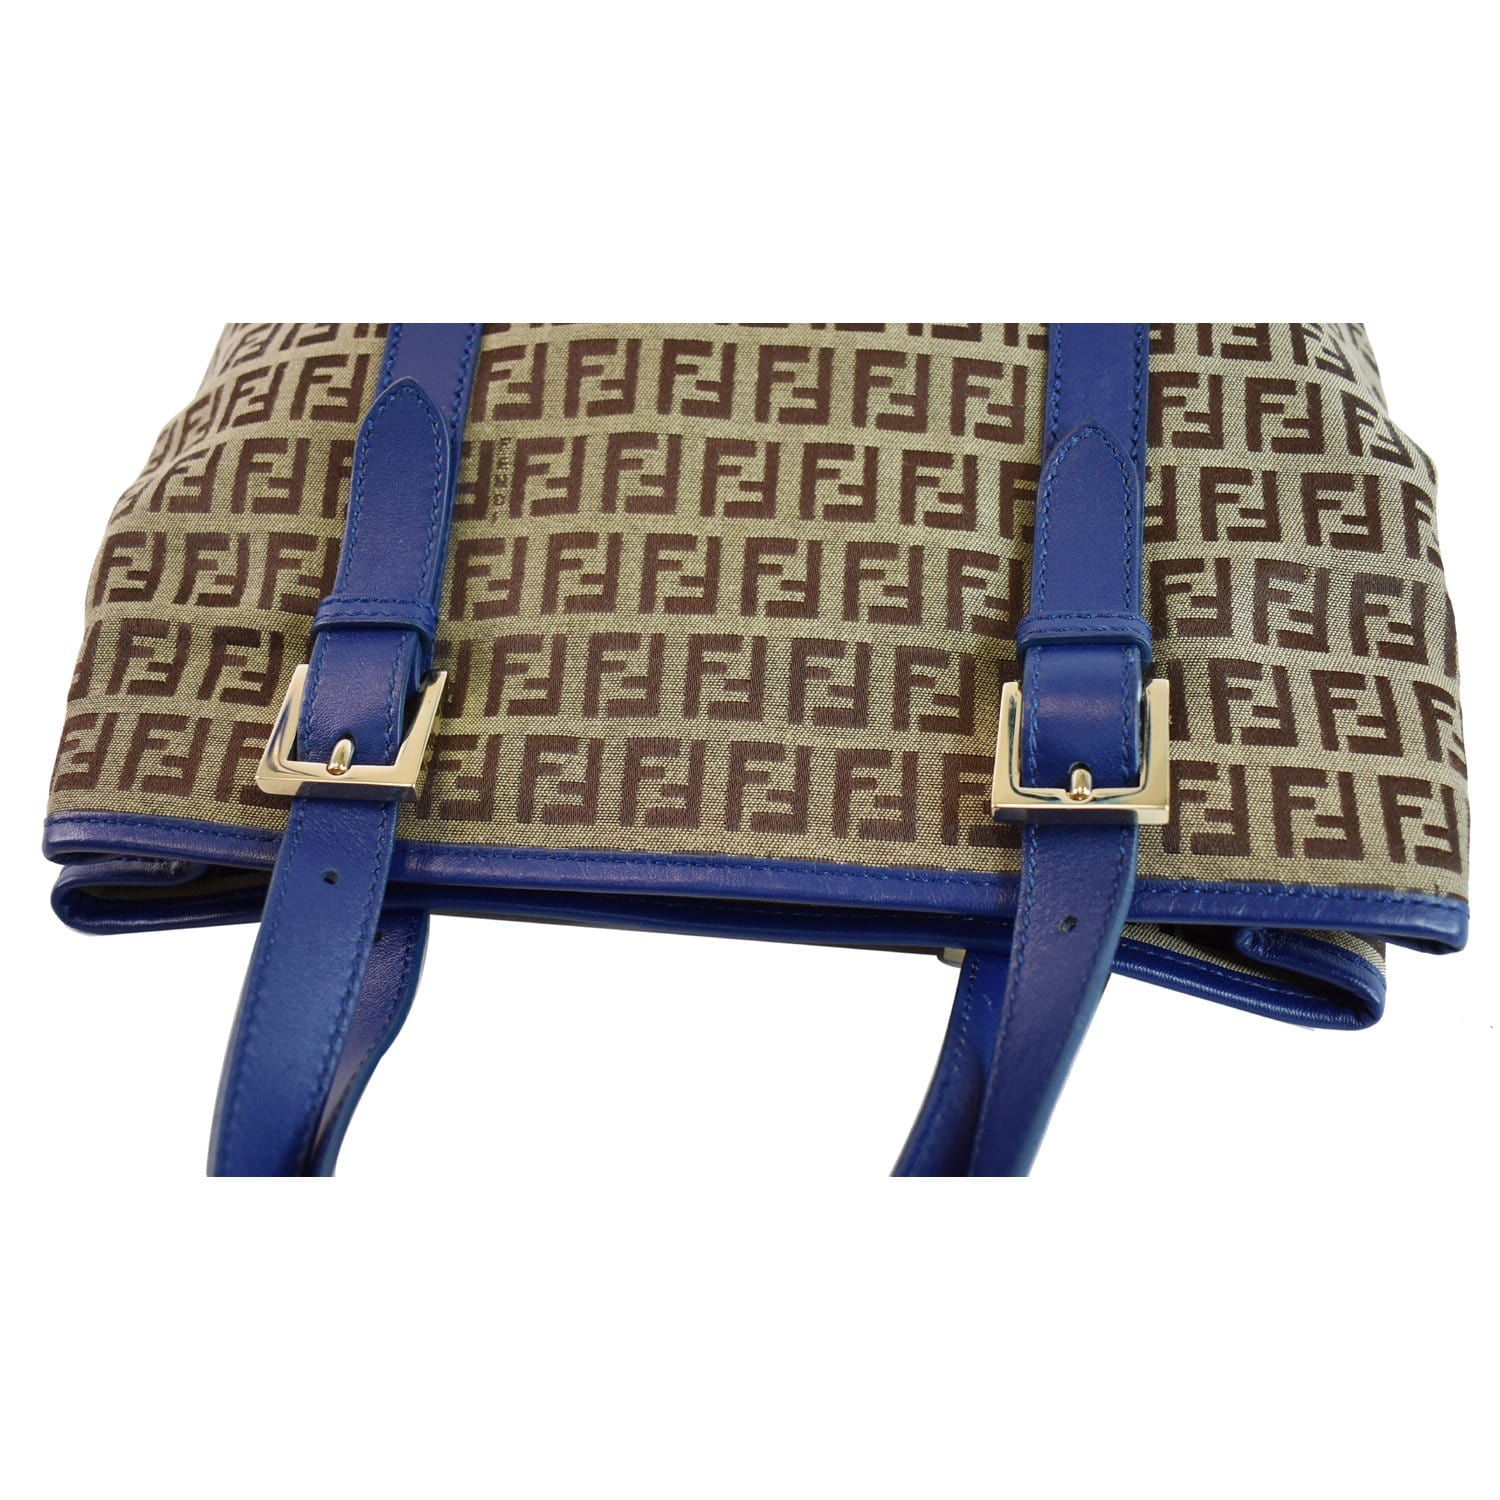 Fendi Pre-Owned - 1990-2000s Zucchino Shoulder Bag - Women - Canvas/Leather - One Size - Blue